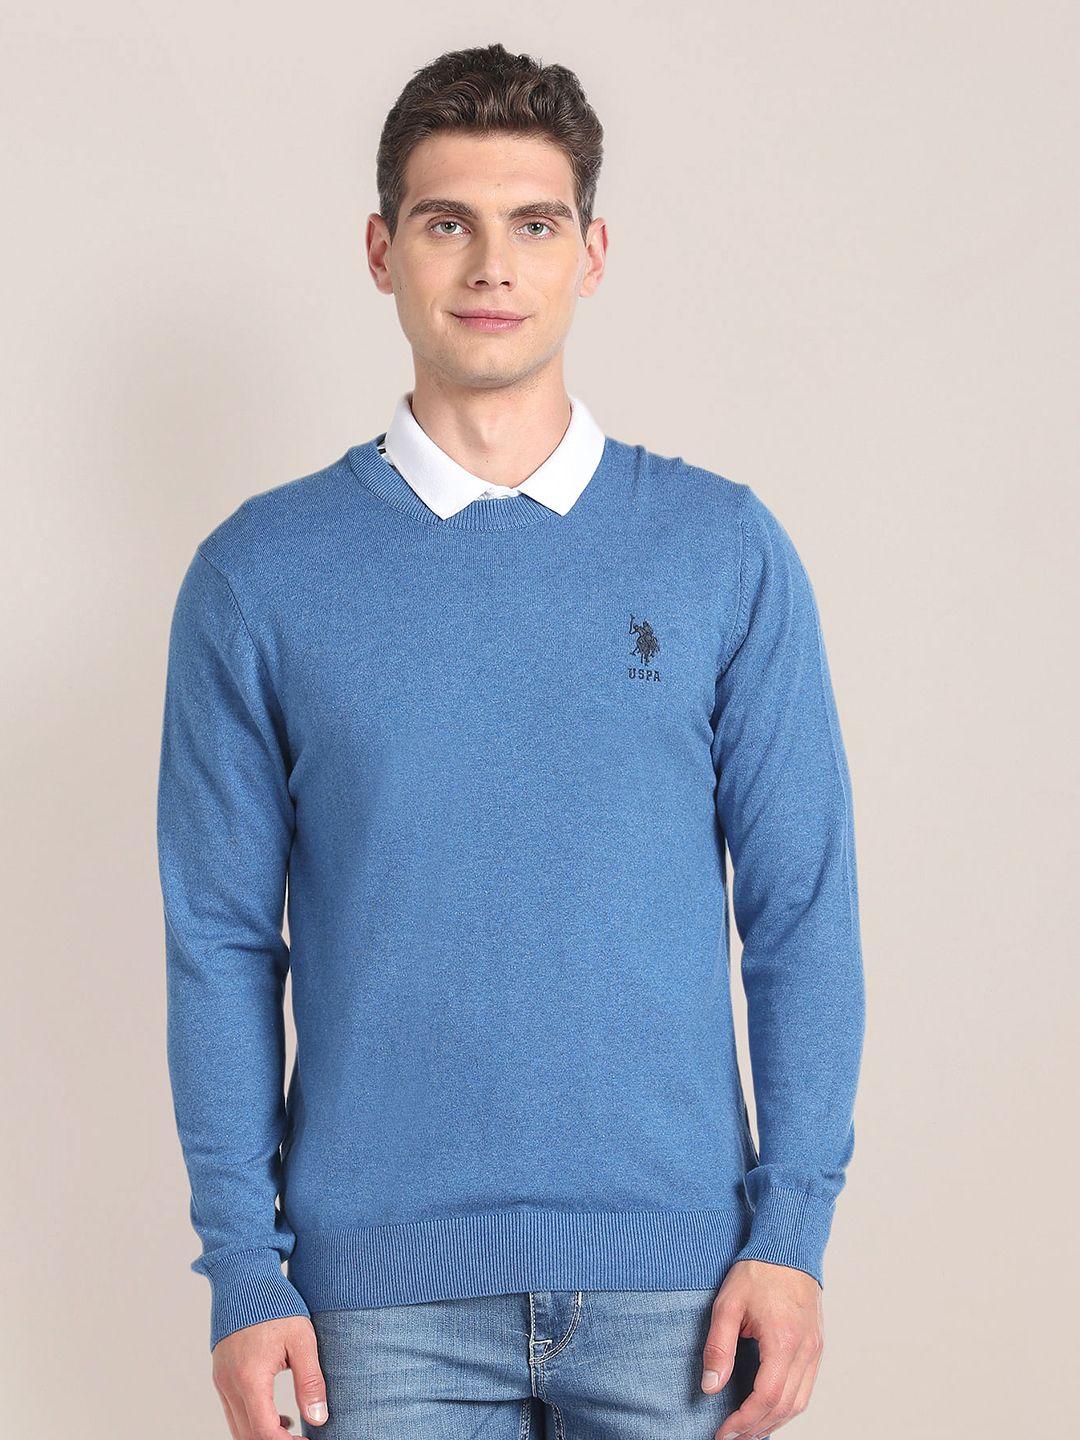 u.s. polo assn. round neck long sleeves pullover sweater